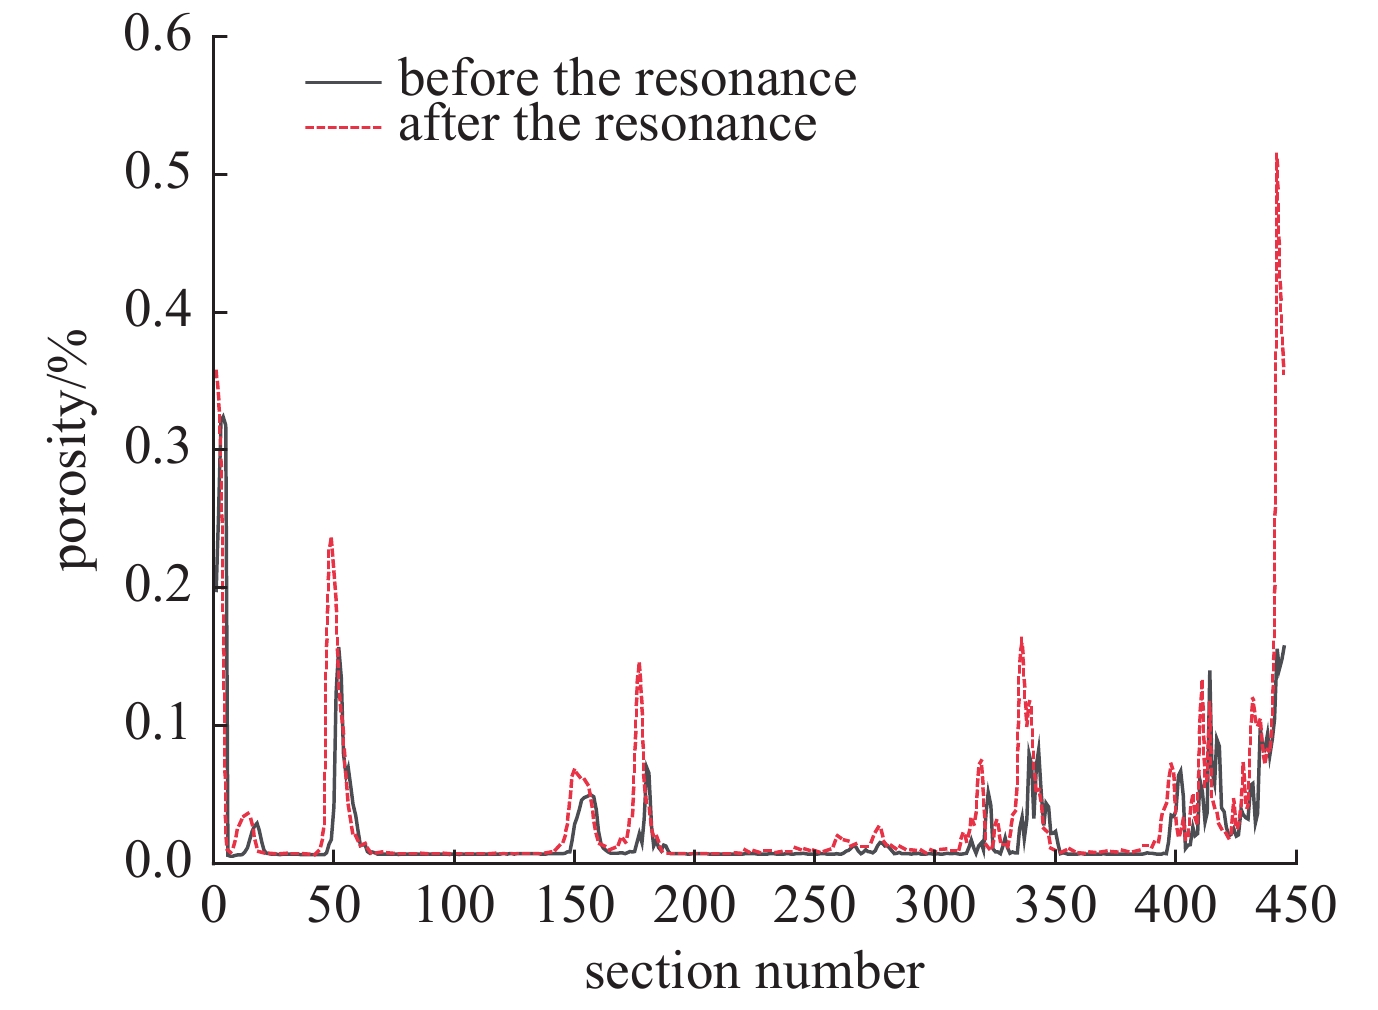 Changes in porosity before and after resonance